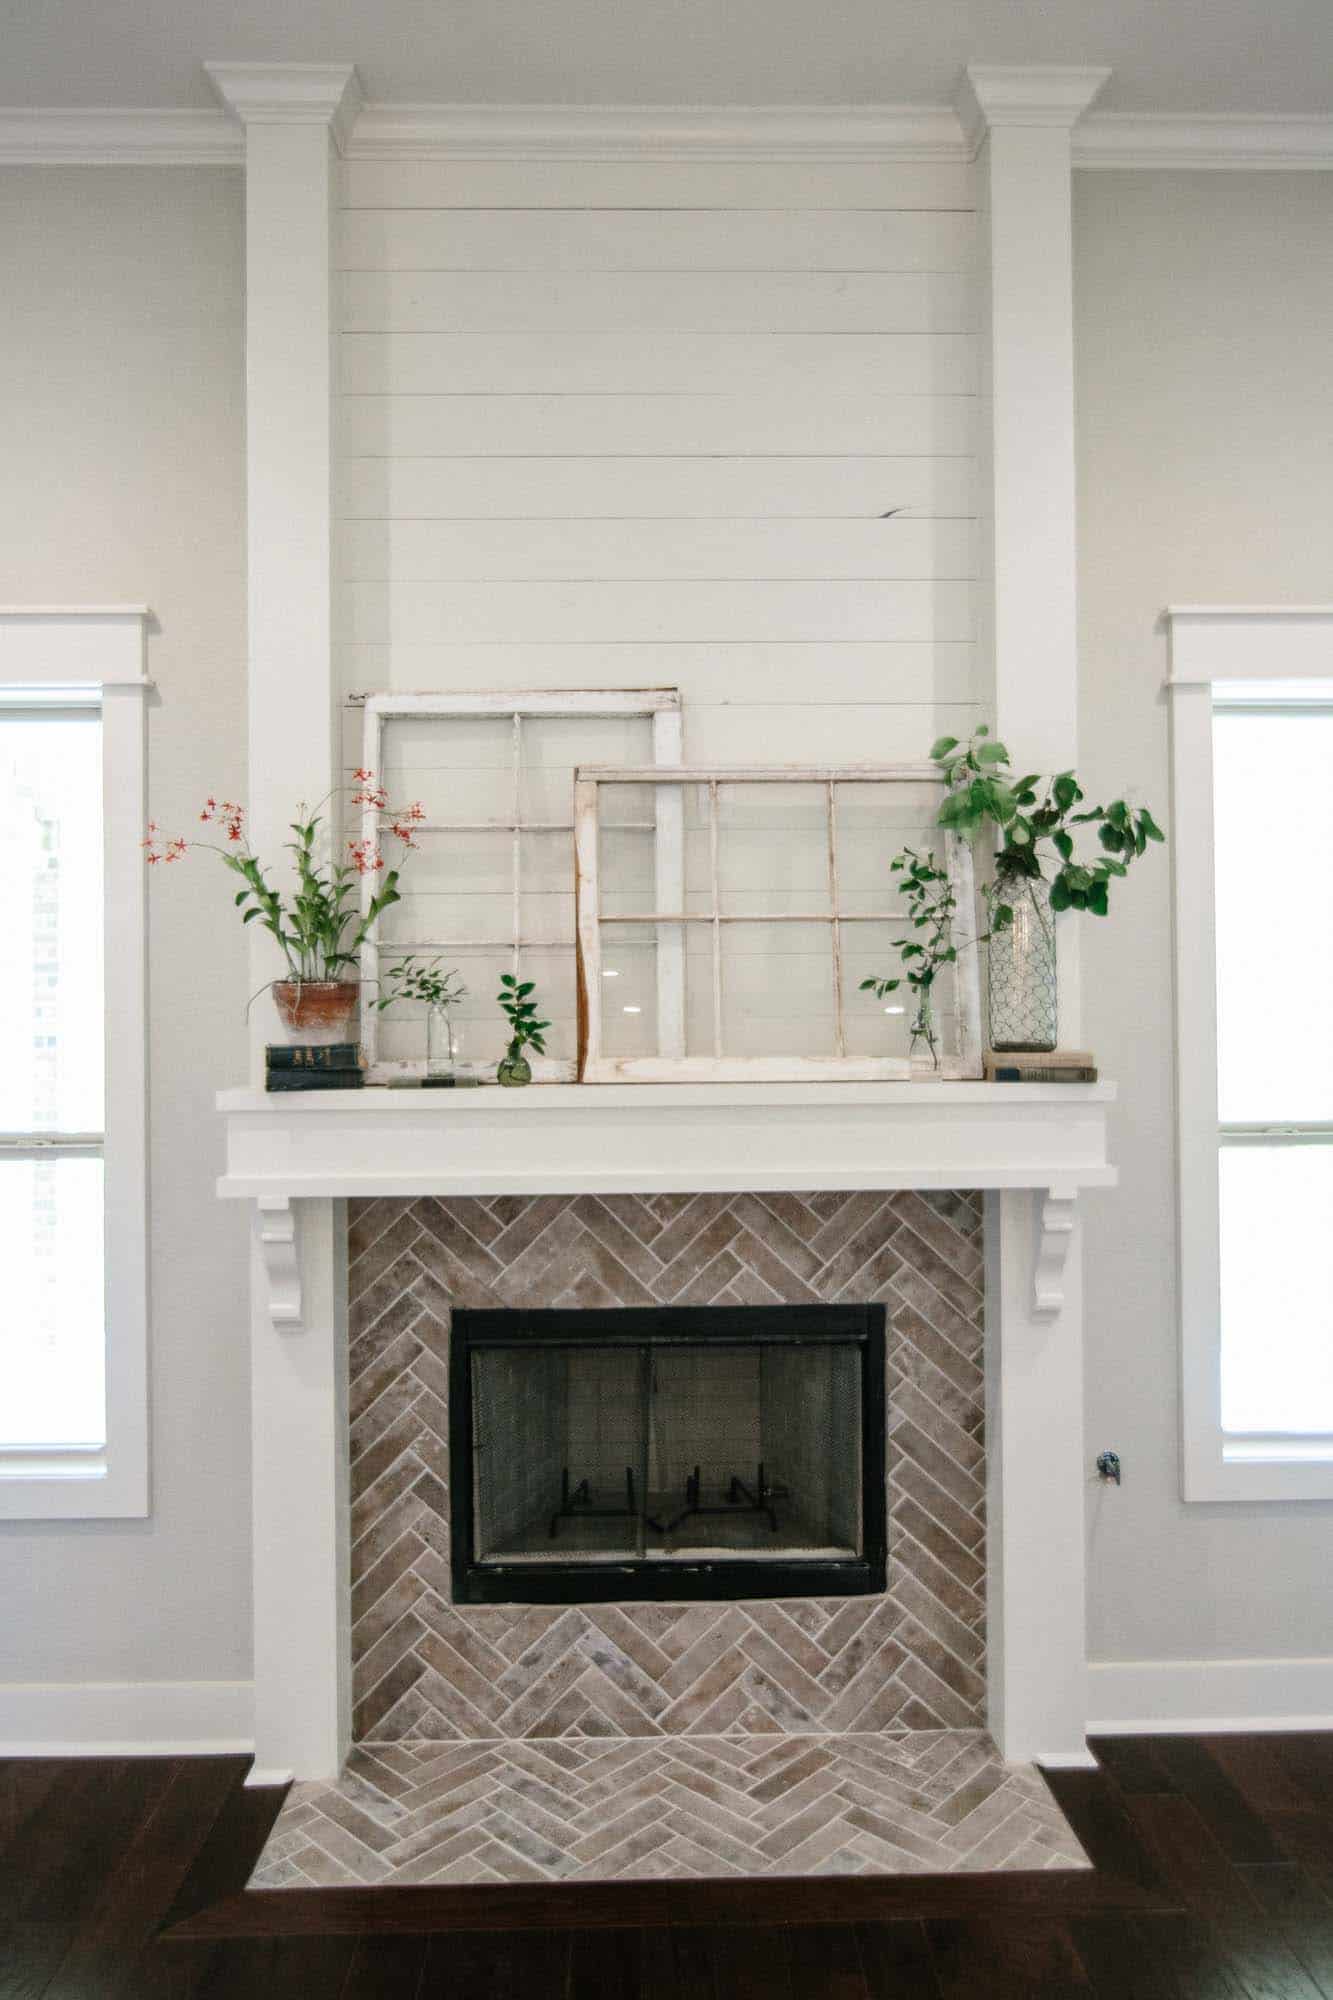 Farmhouse style fireplace with herringbone tiling